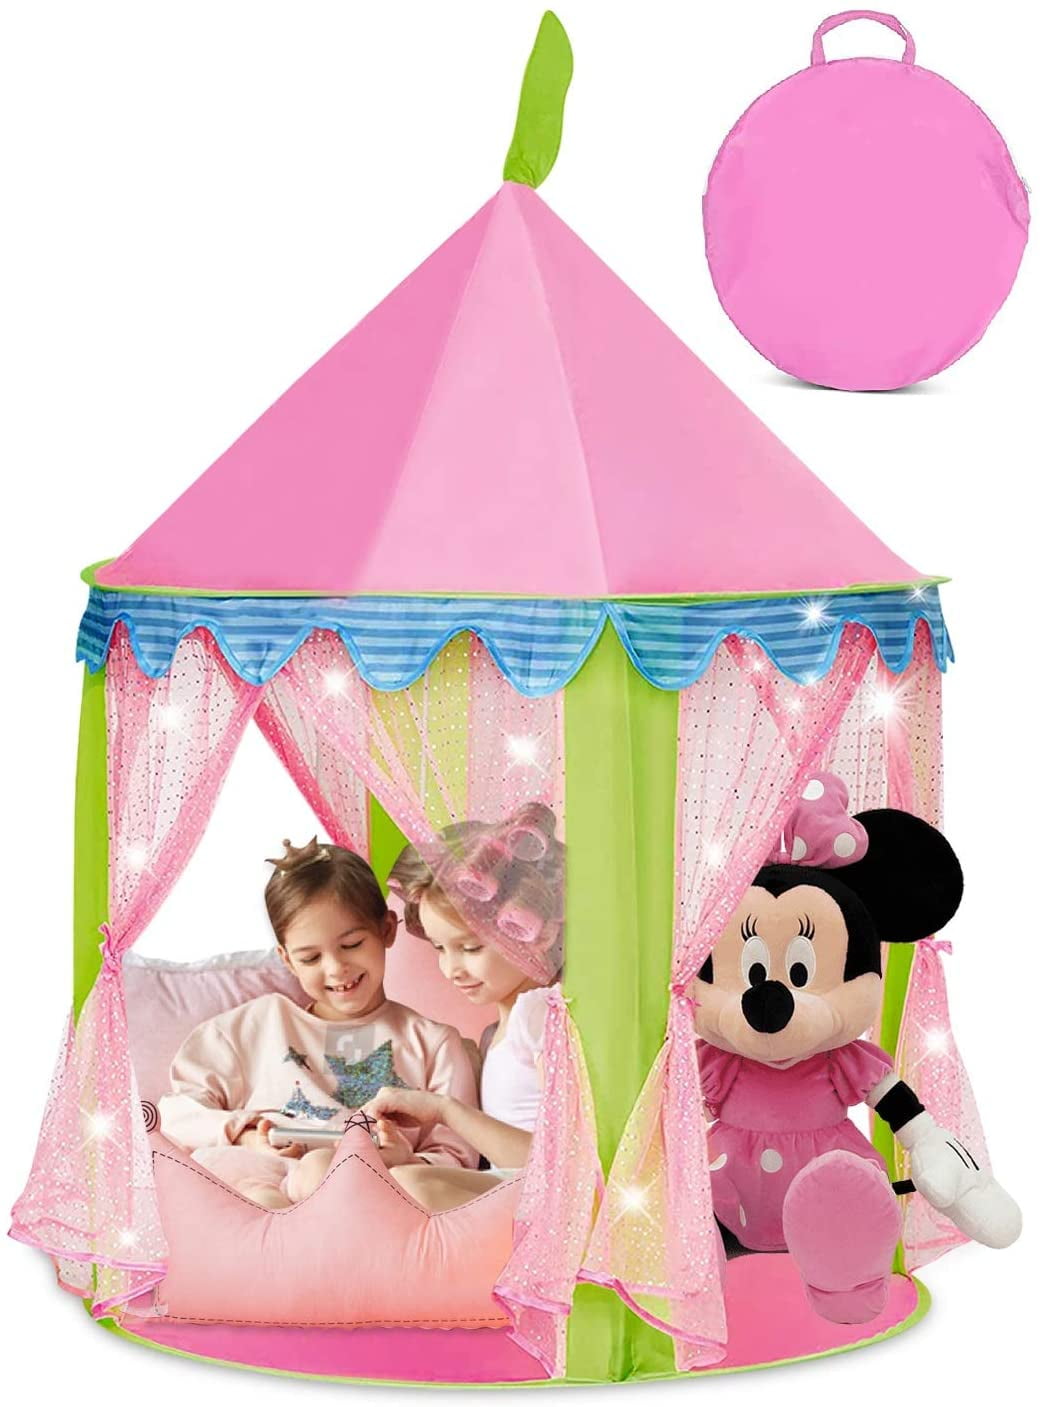 Princess Castle Play House Kids Portable Play Tent Indoor/Outdoor BabyGift Pink 